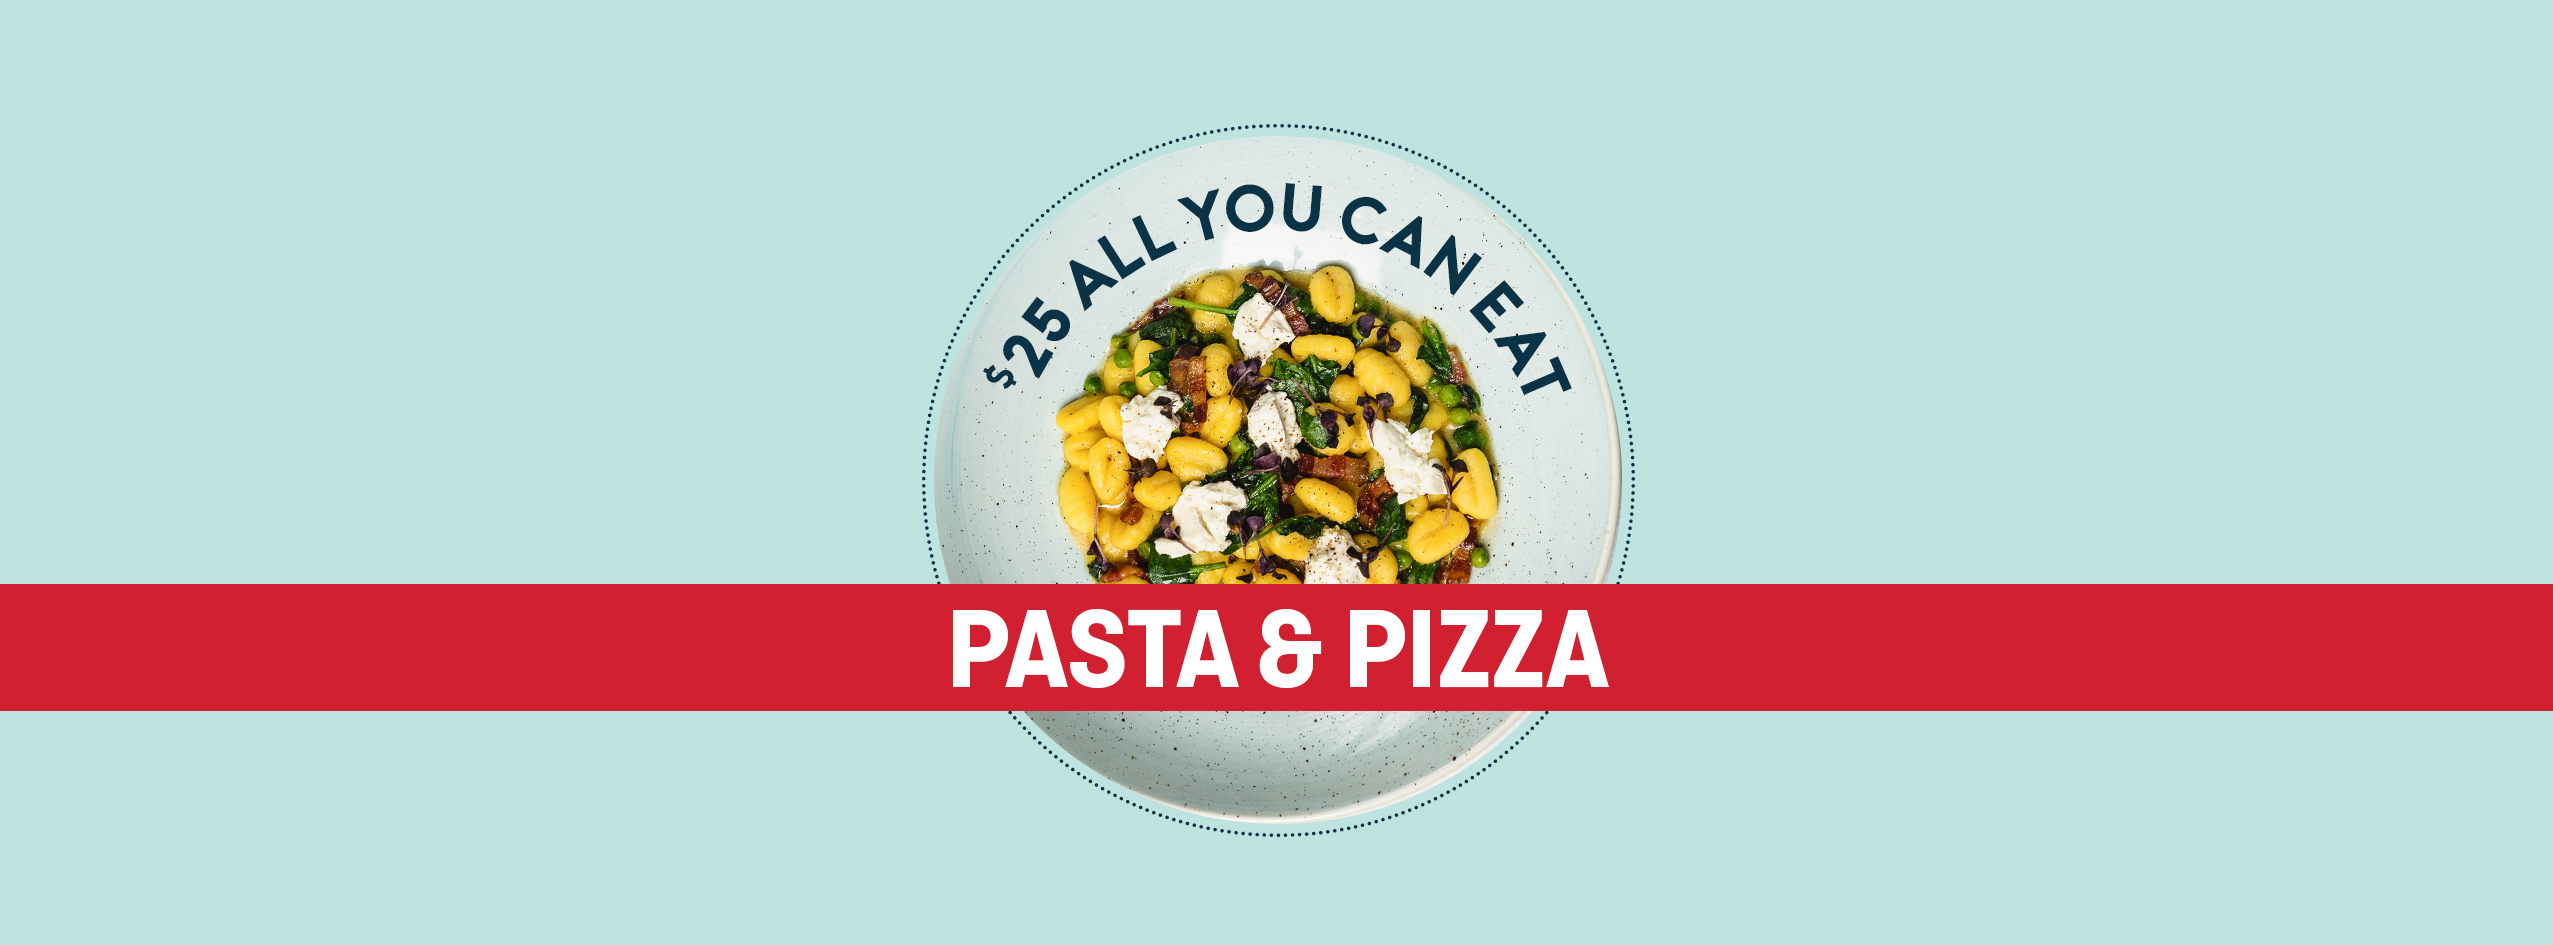 All You Can Eat Pizza & Pasta | Sydney